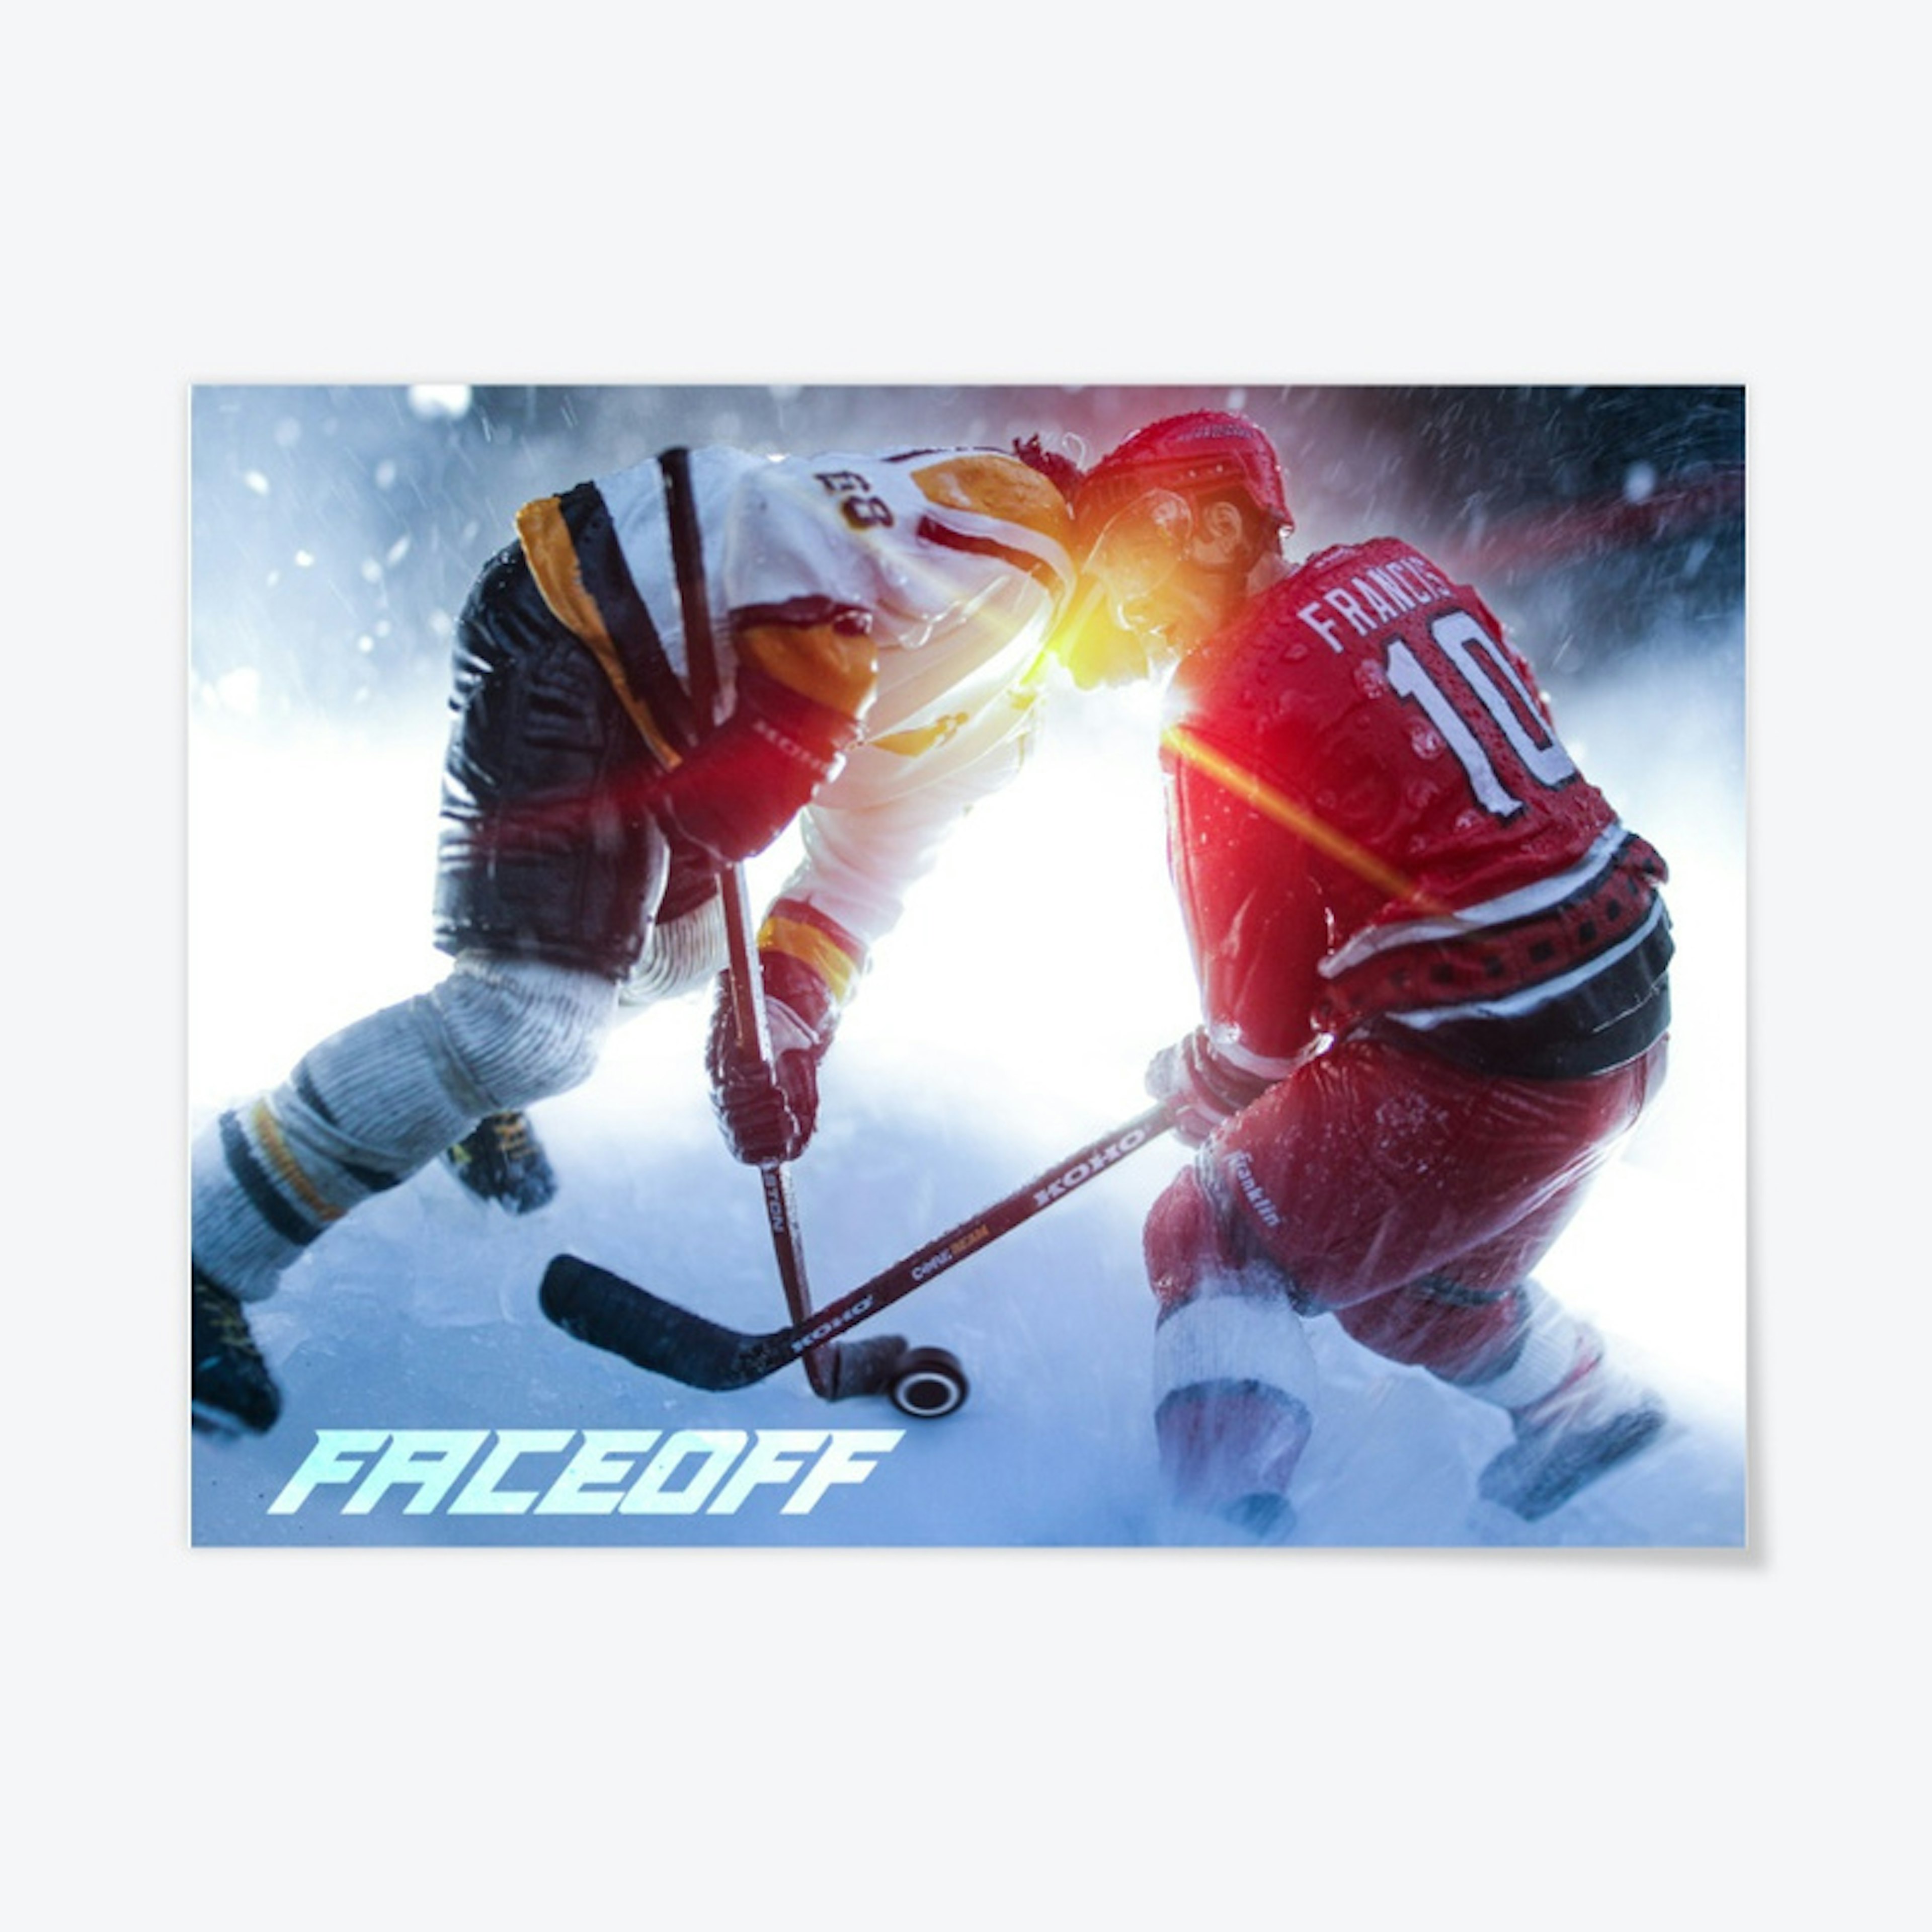 Faceoff - The Toy Hockey Poster